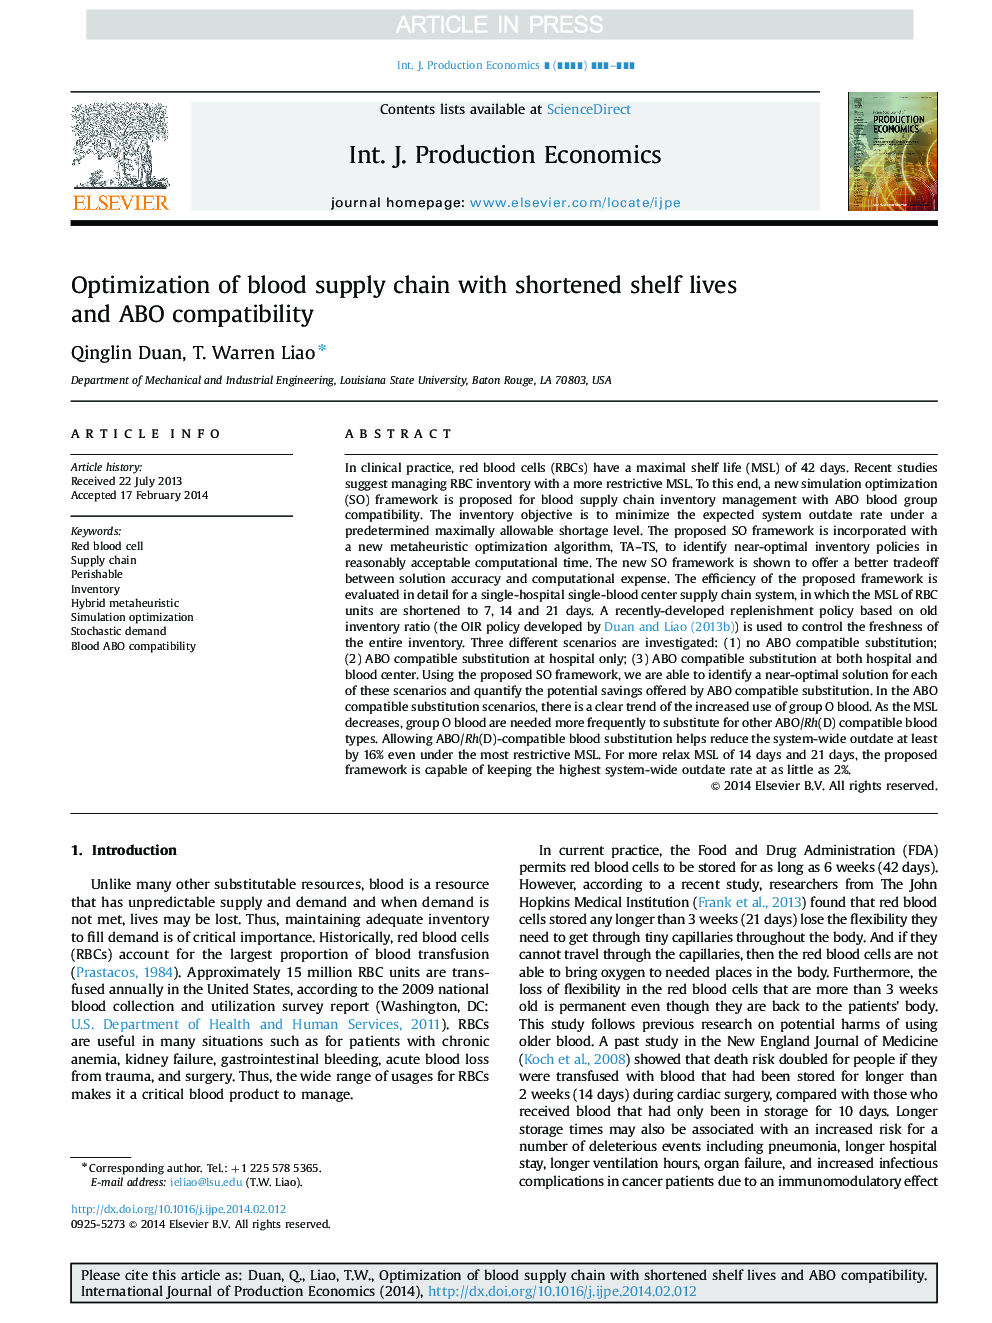 Optimization of blood supply chain with shortened shelf lives and ABO compatibility